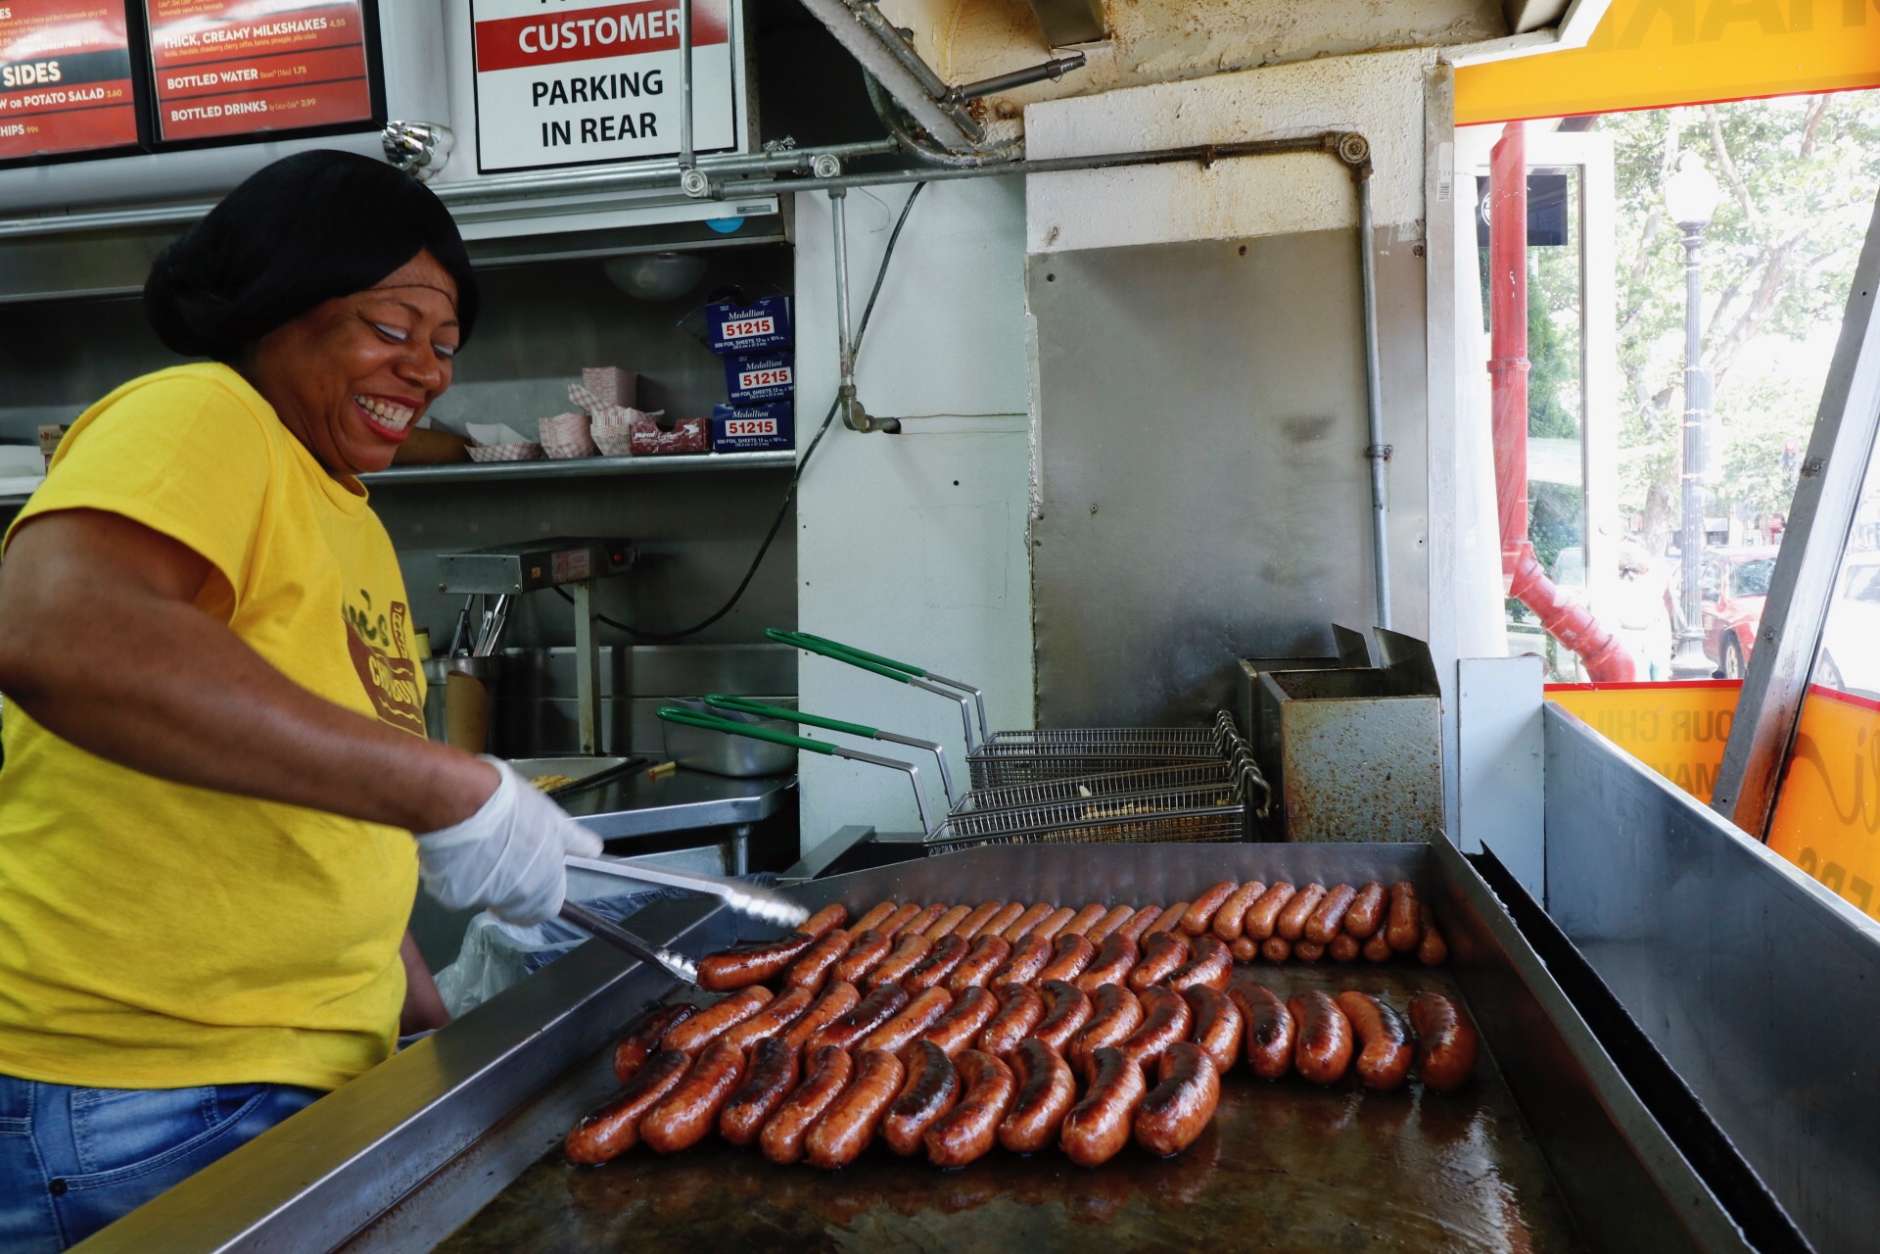 Angela Powell makes sure the dogs are just right at Ben's Chili Bowl on U Street. (WTOP/Kate Ryan)